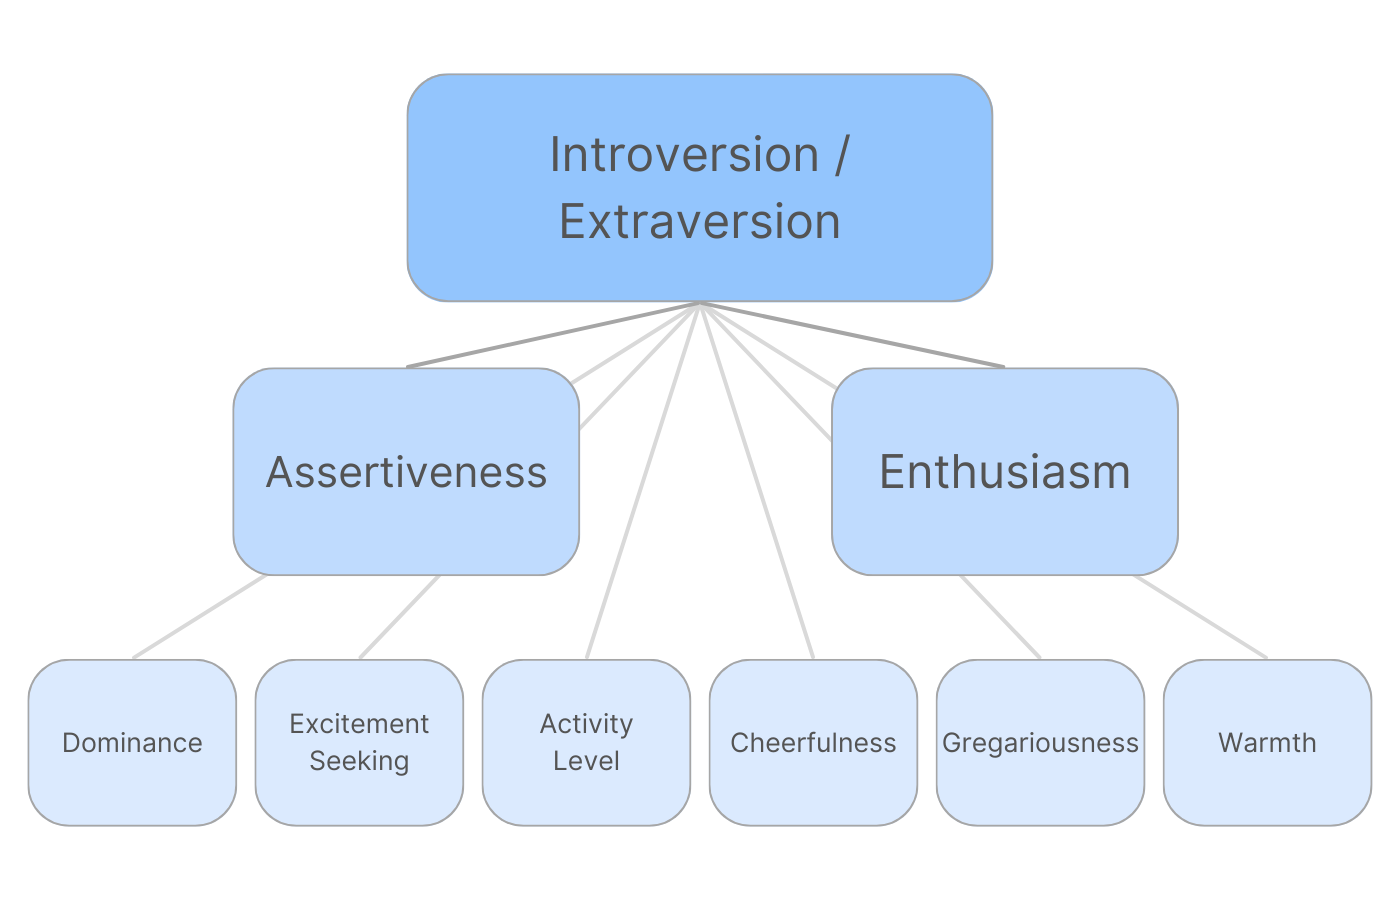 A diagram of the subtraits that make up Introversion and Extraversion